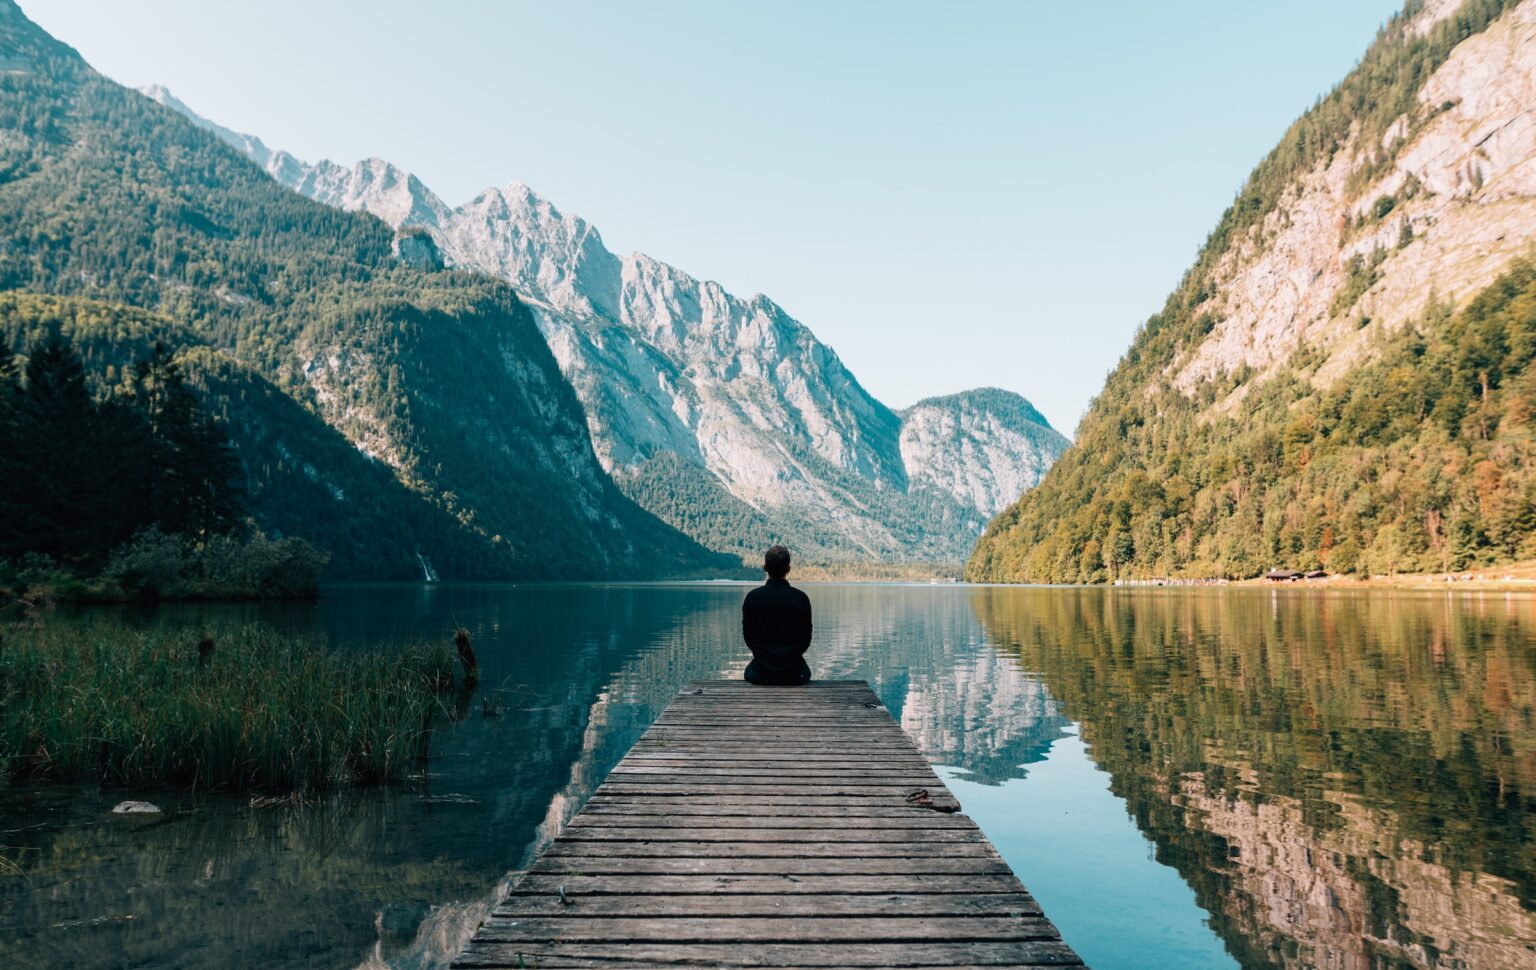 Mindfulness meditation is a form of mindfulness that is widely practiced in the western world. Why does Jonah Engler believe it benefits people?